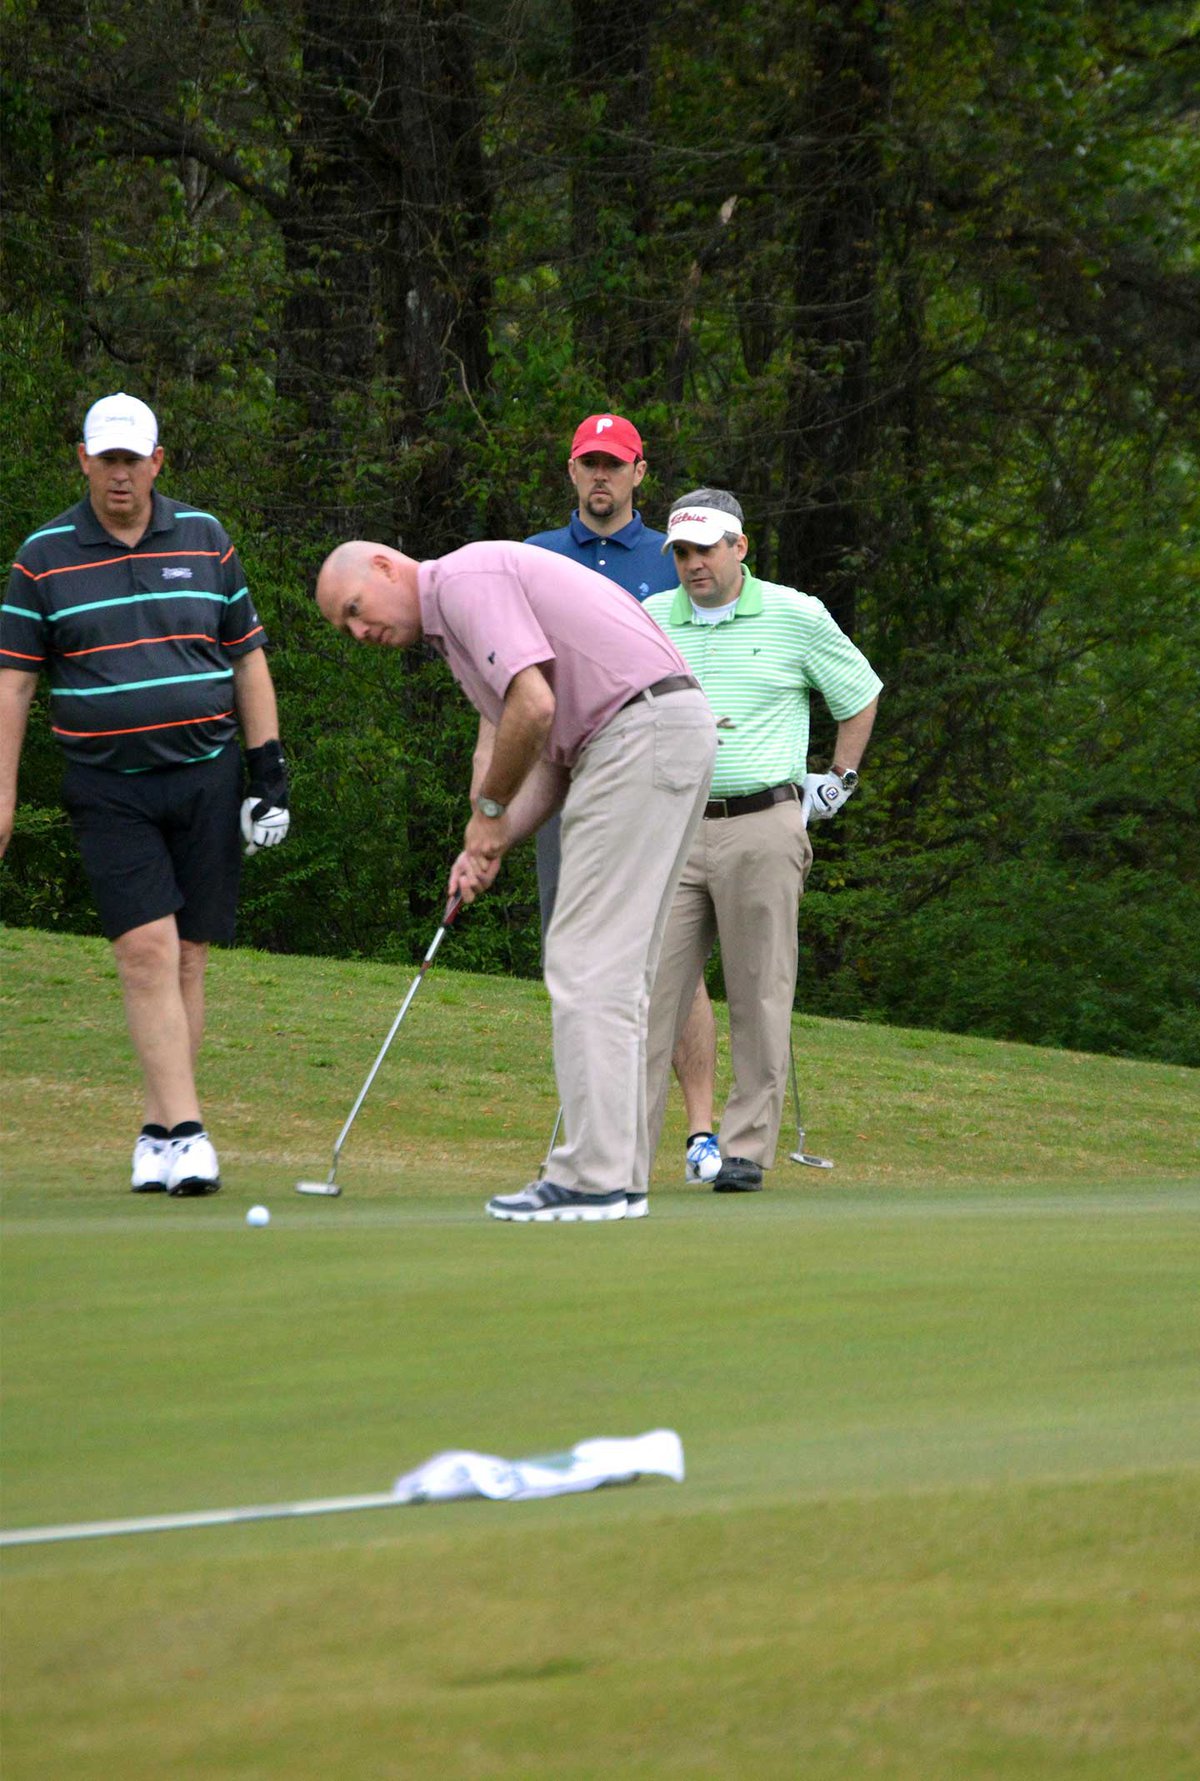 Kiwanis tees up for 25th annual charity golf tournament April 10